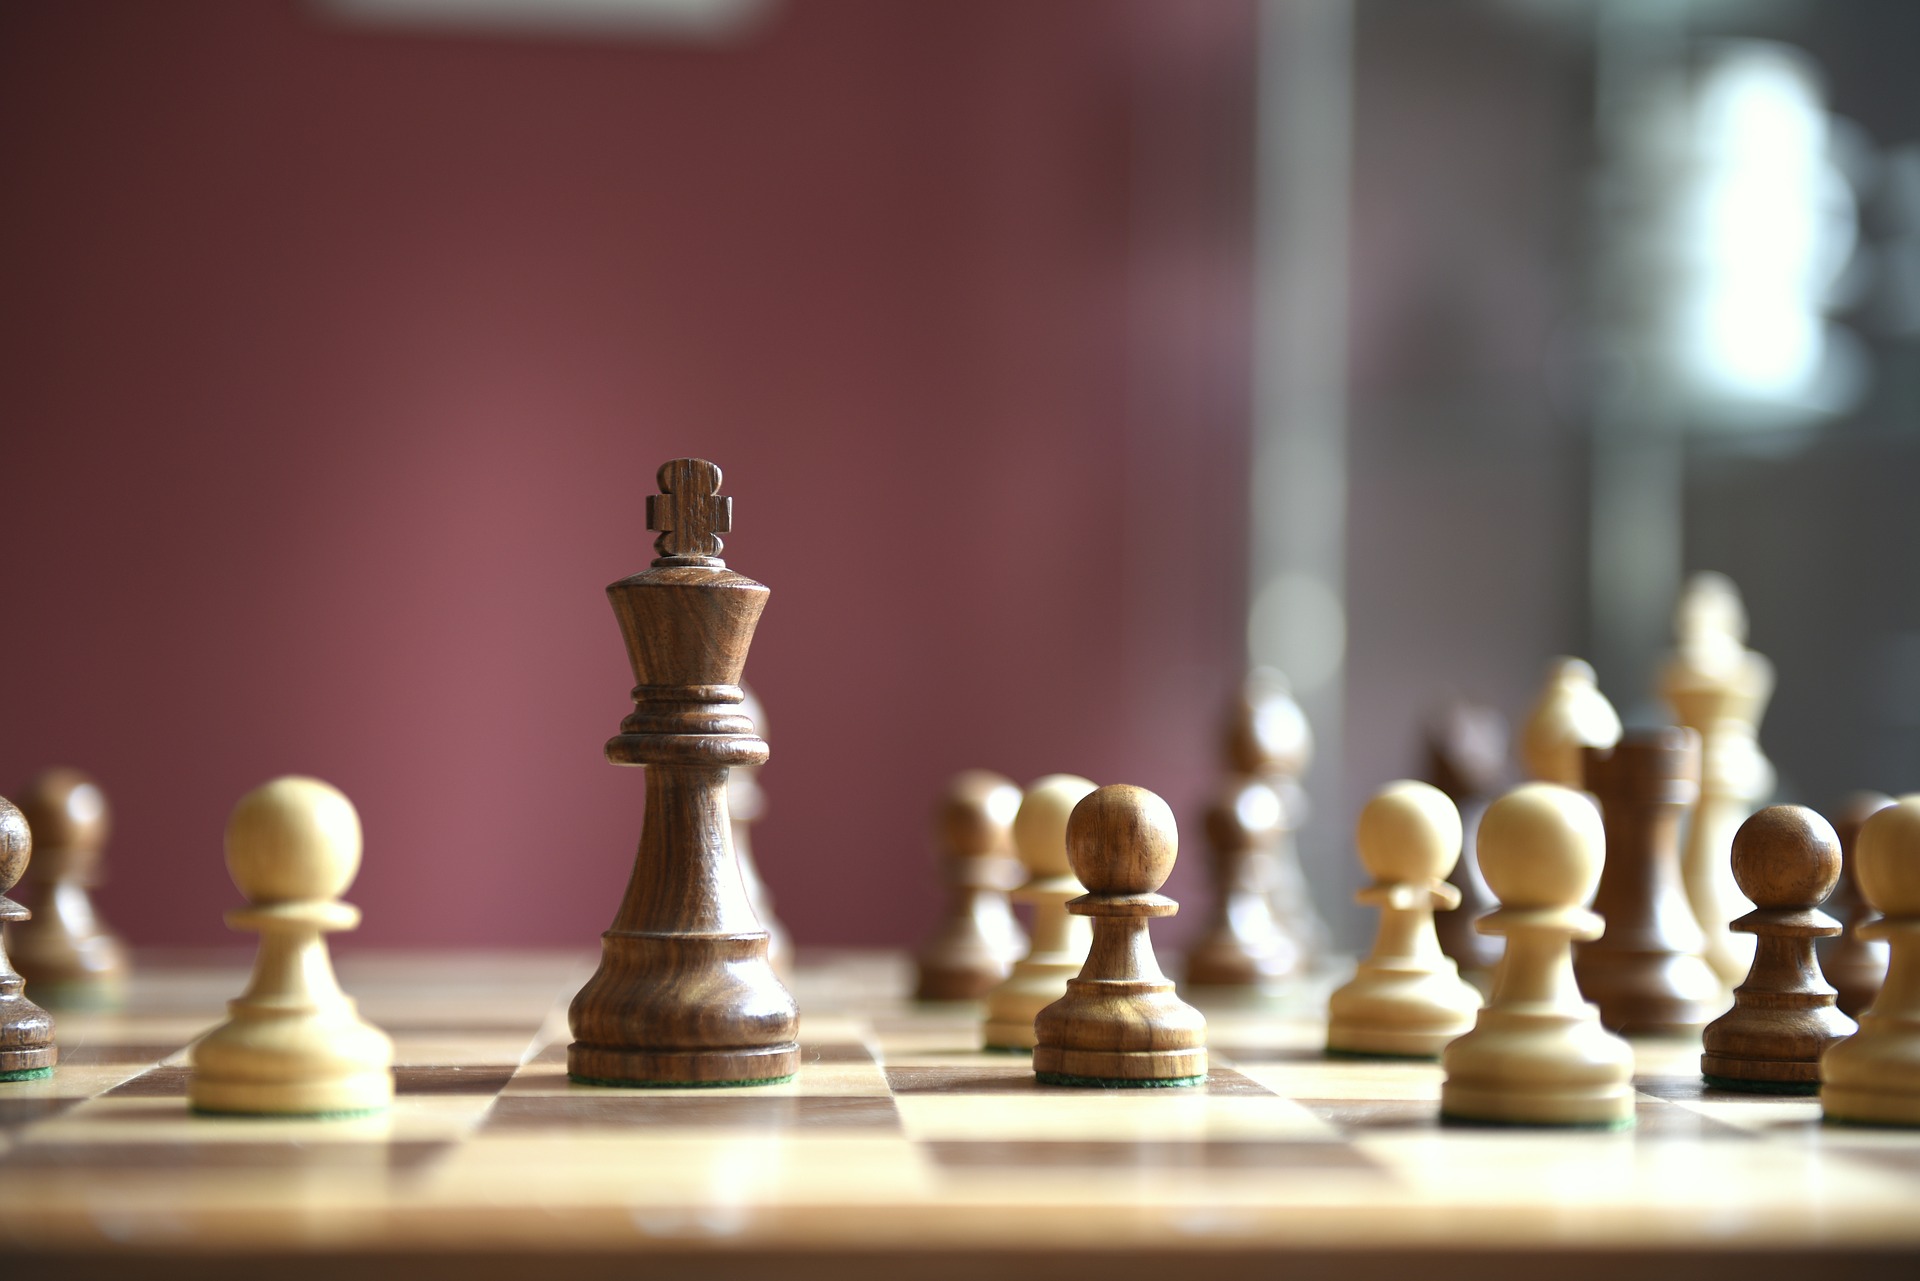 Chess: A Historic Game of Skill, Strategy, and Advantages   